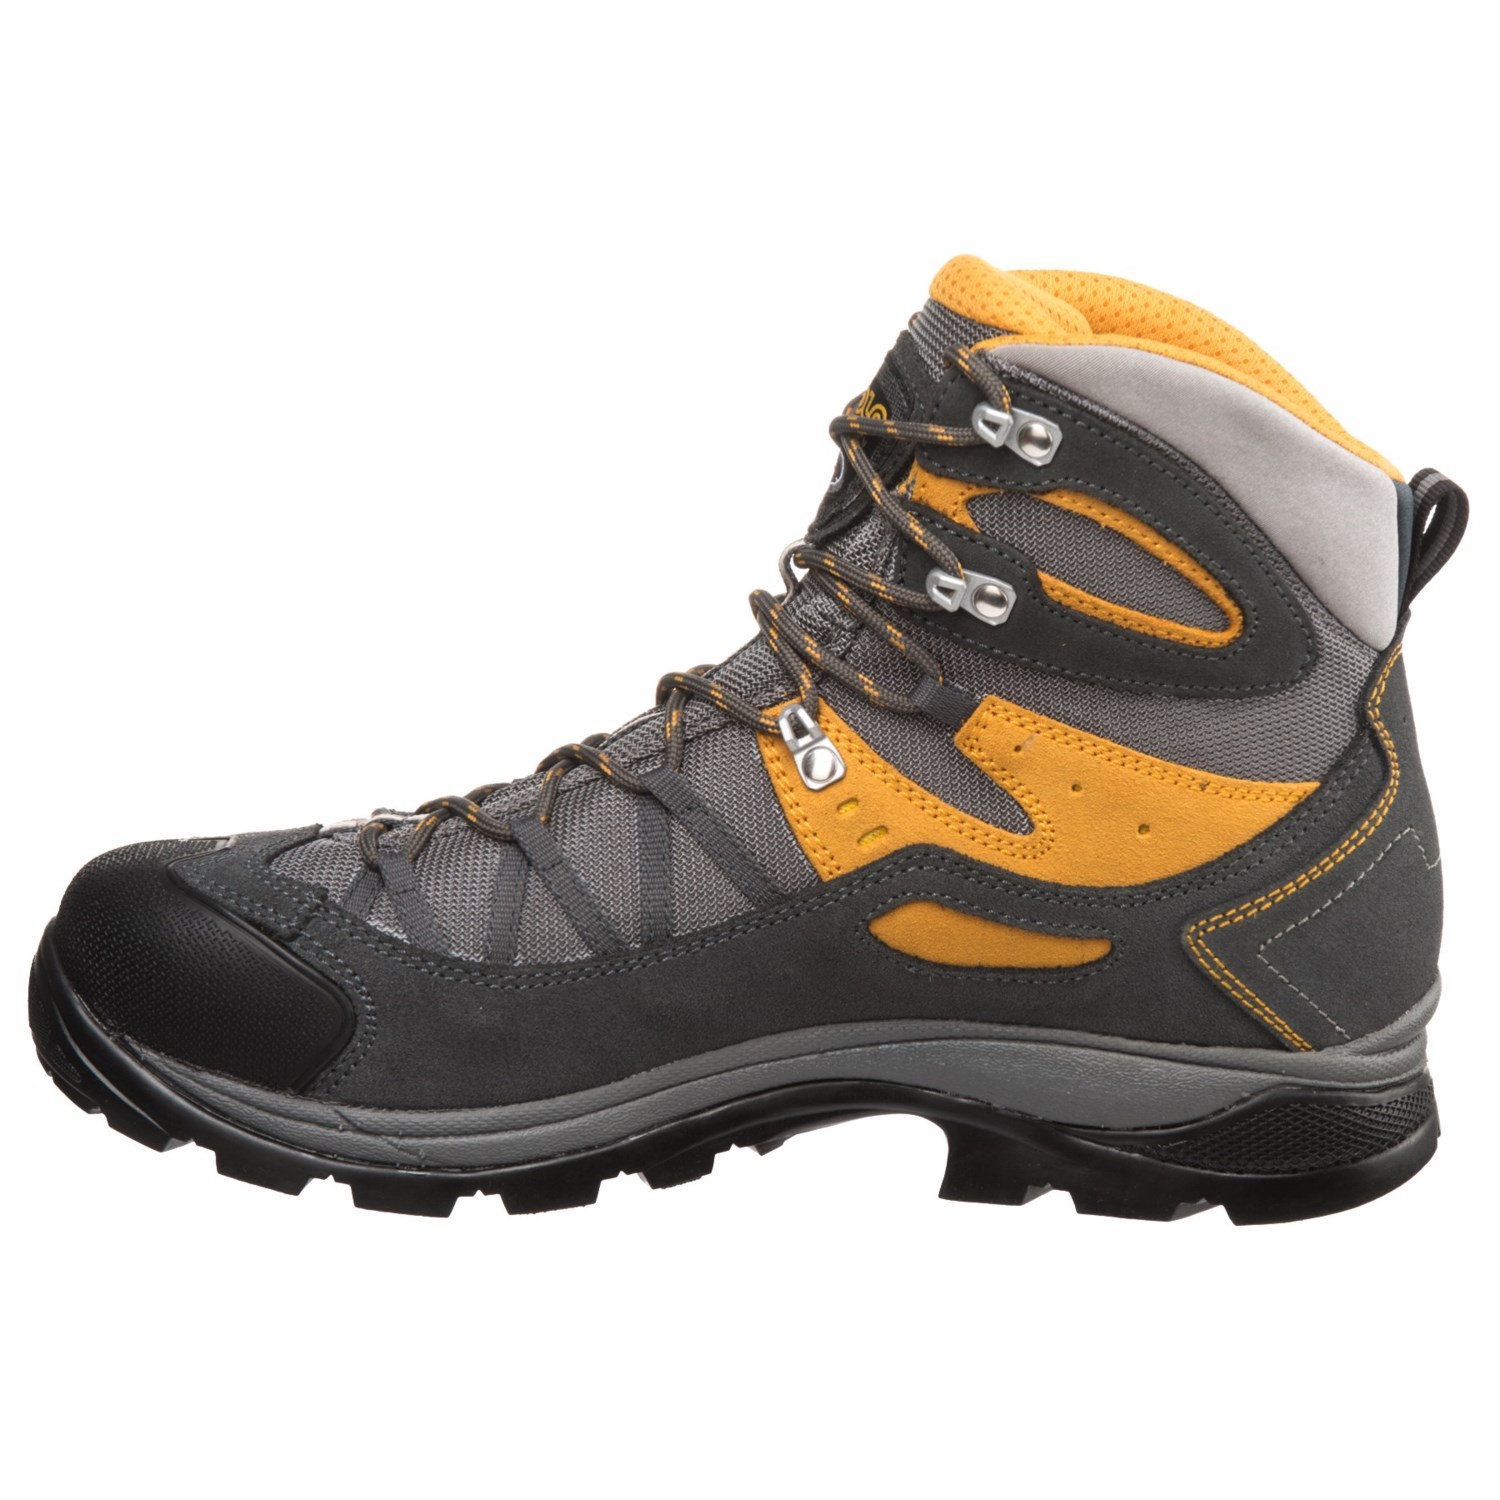 Asolo Swing Hiking Boots (For Men) - Save 42%